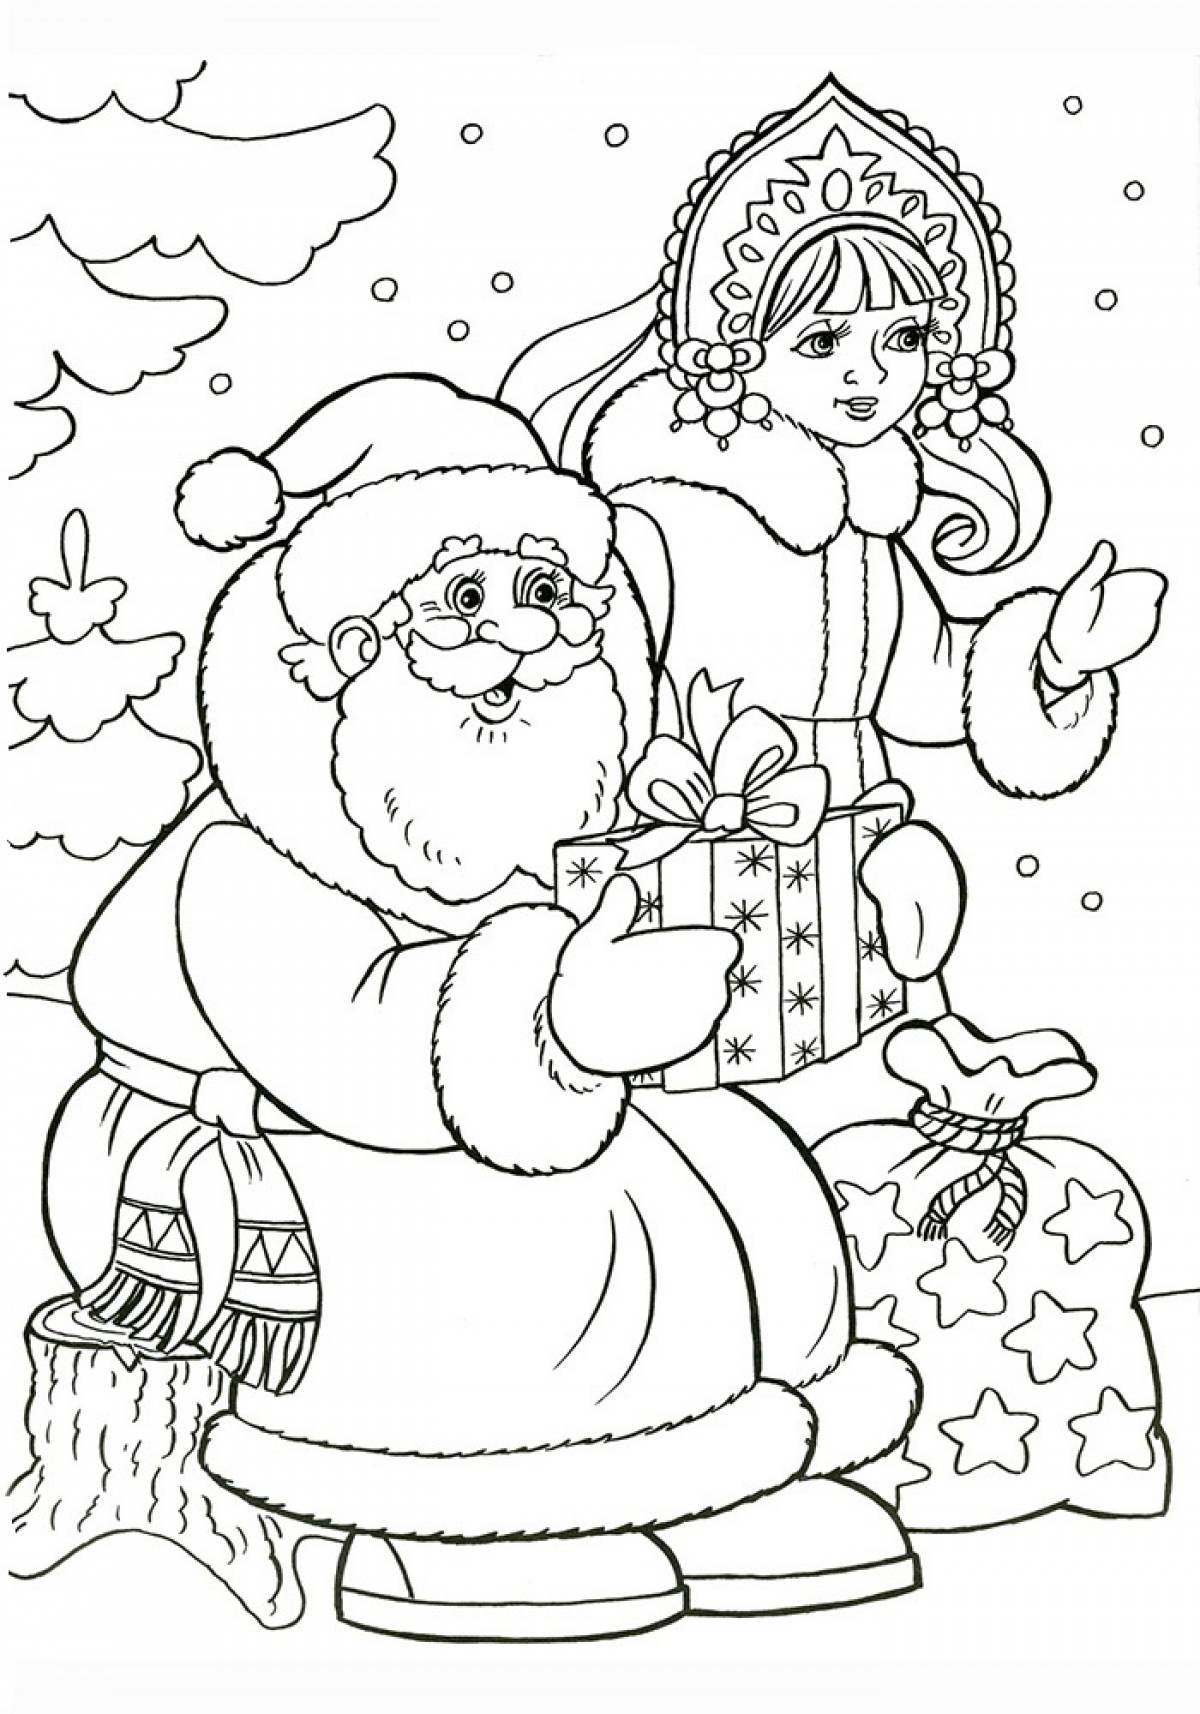 Santa Claus and Snow Maiden give gifts